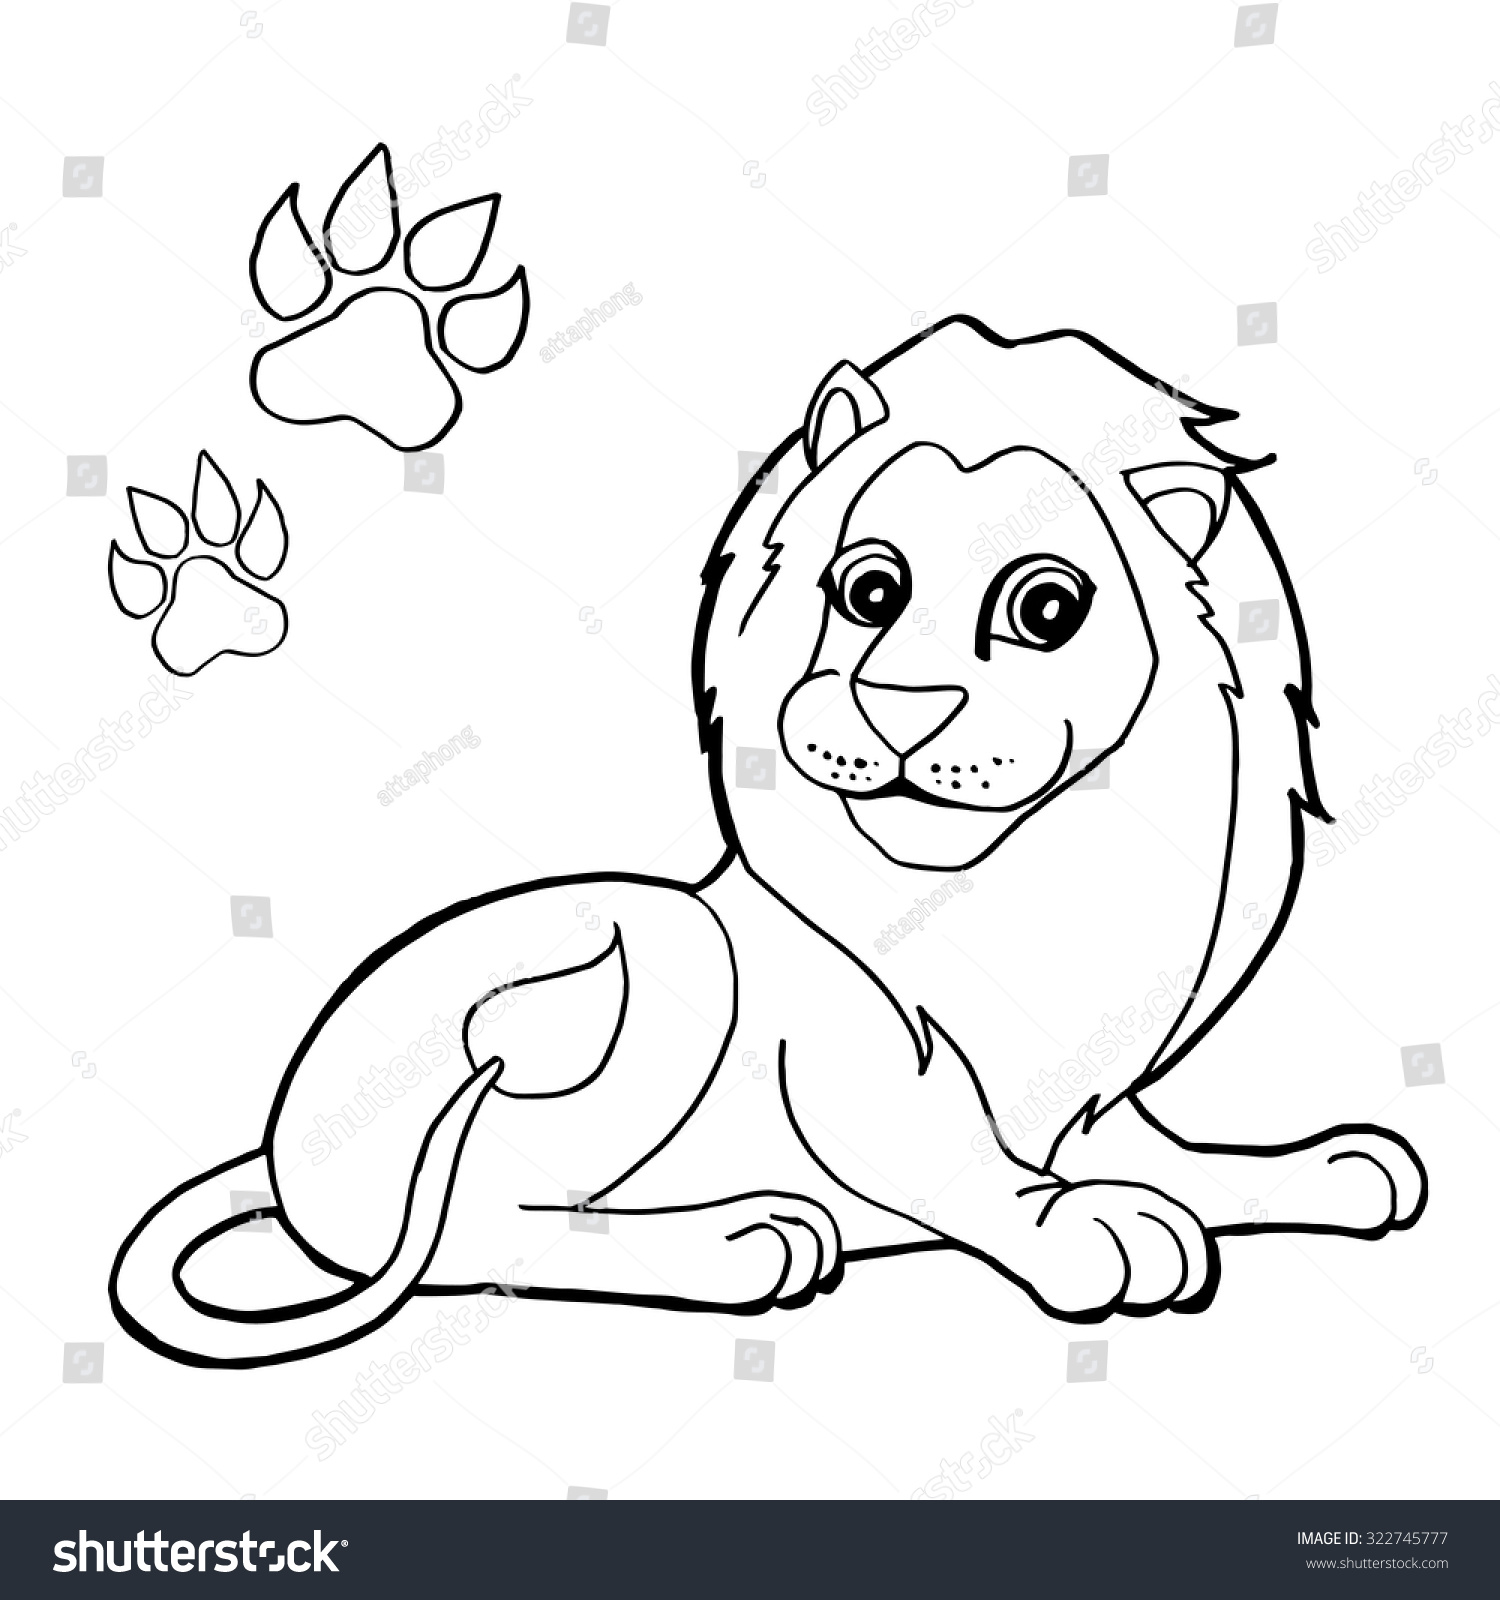 Download Paw Print Lion Coloring Pages Vector Stock Vector 322745777 - Shutterstock